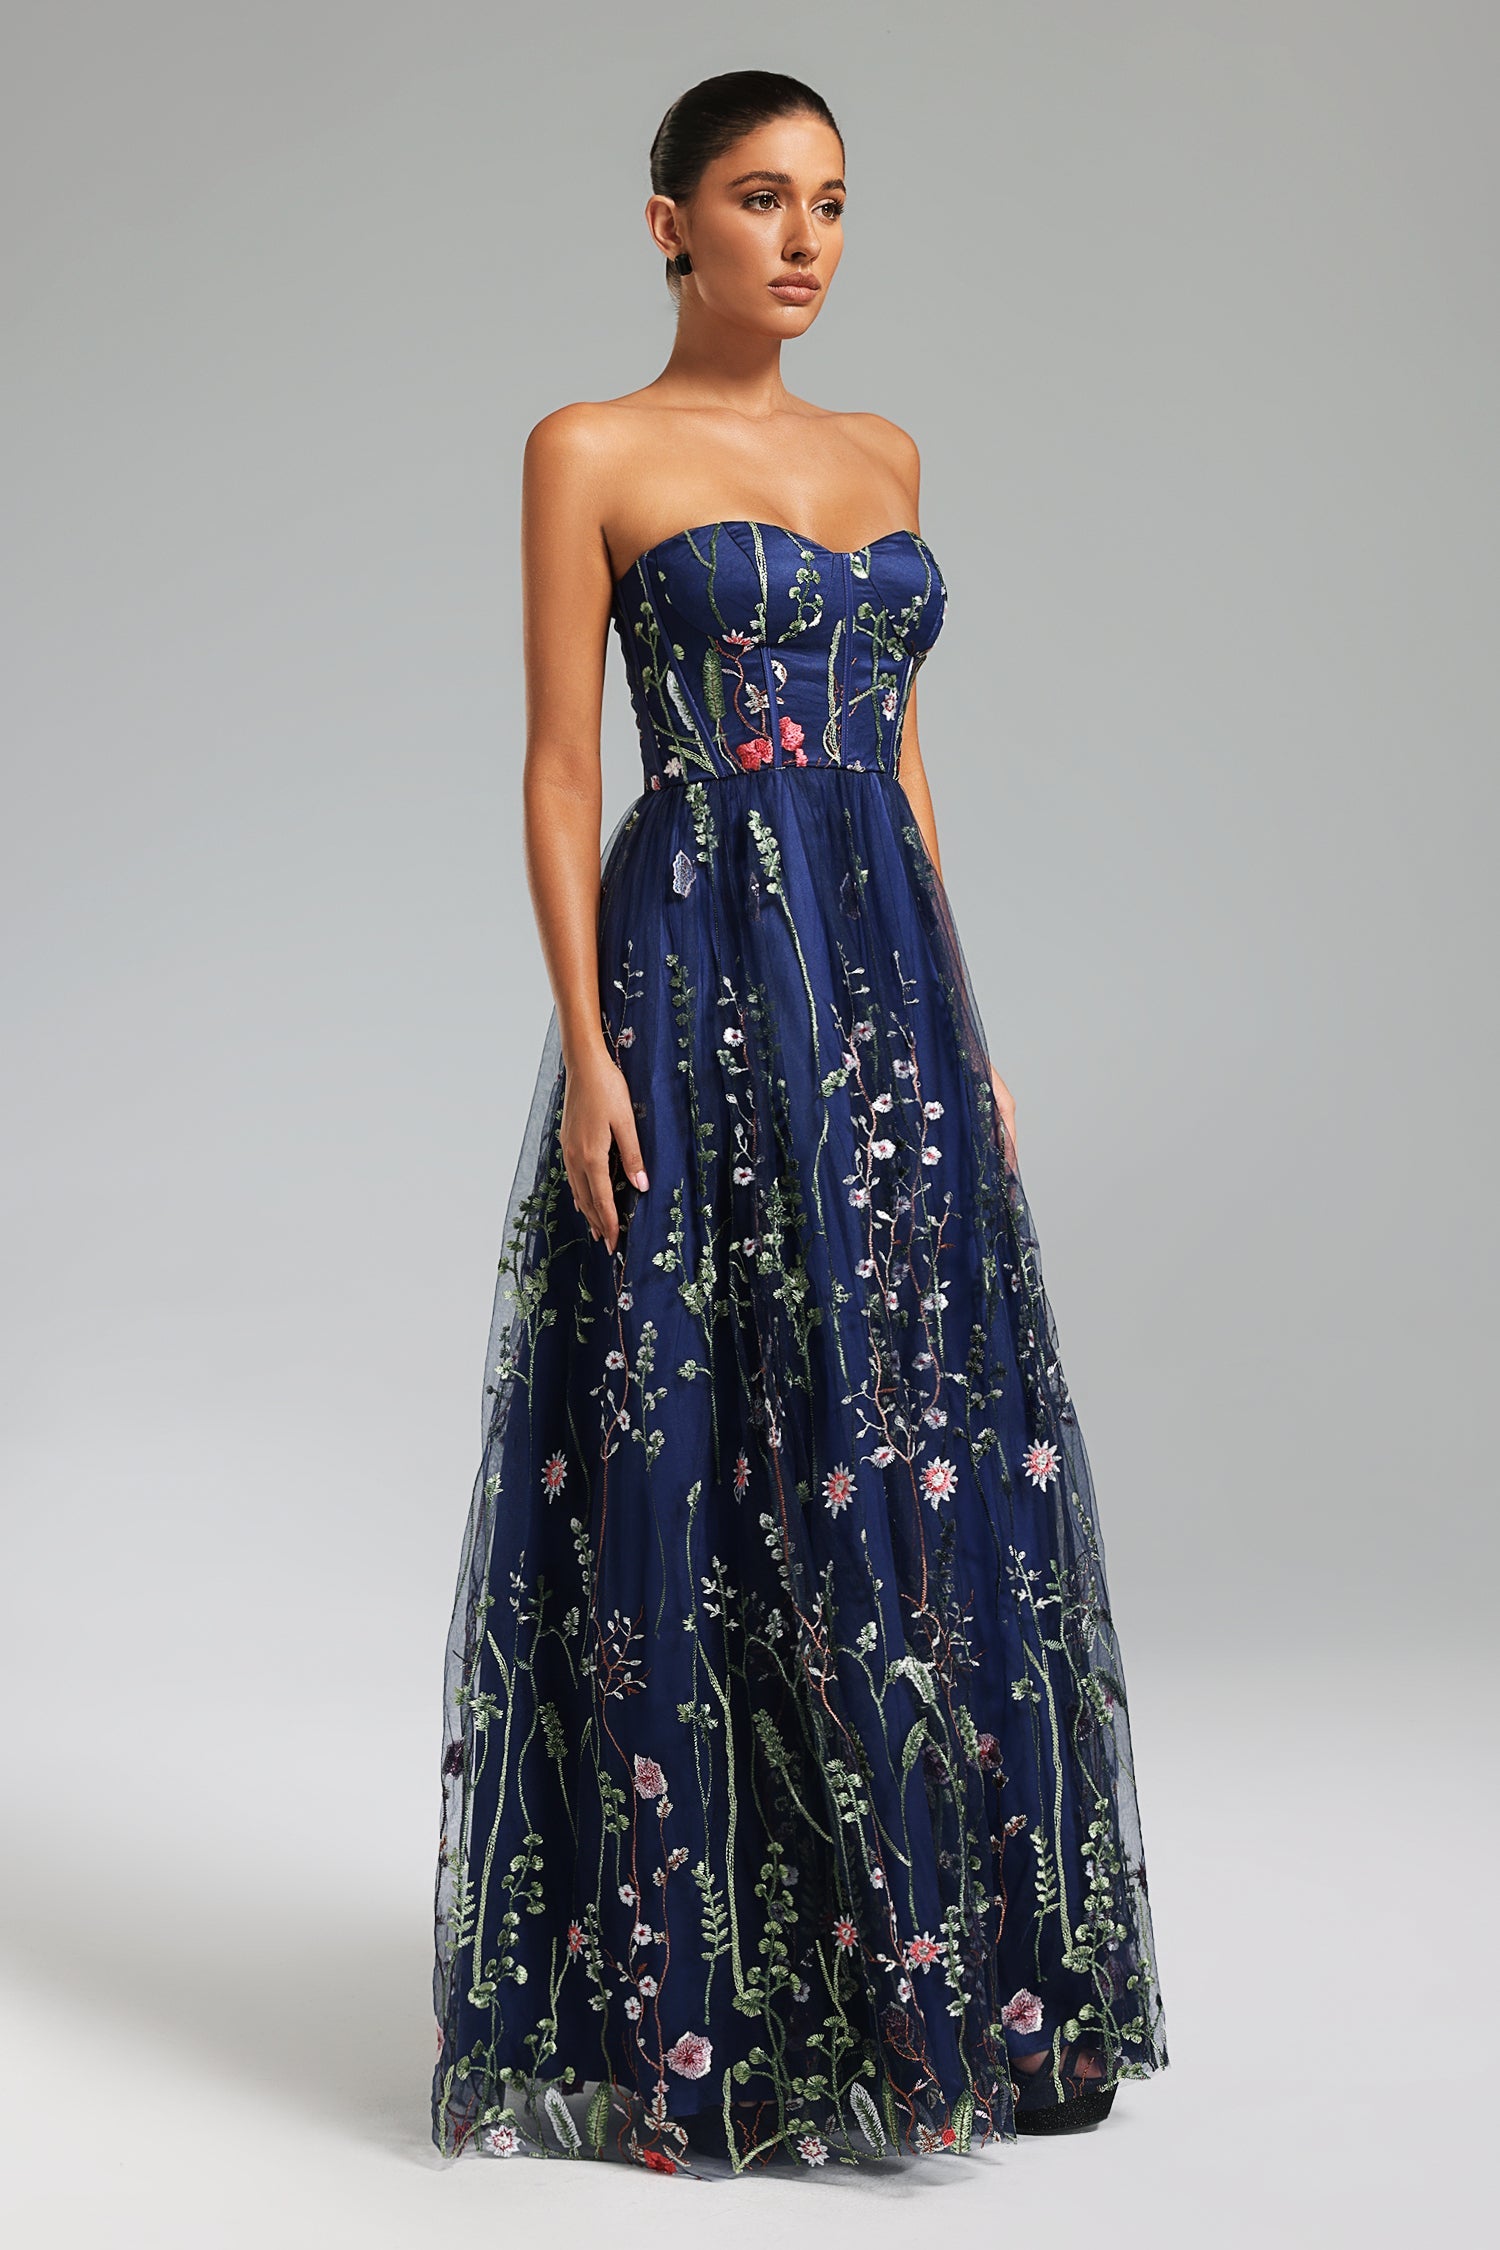 Tusare Open Shoulder Embroidery Maxi Dress - Floral